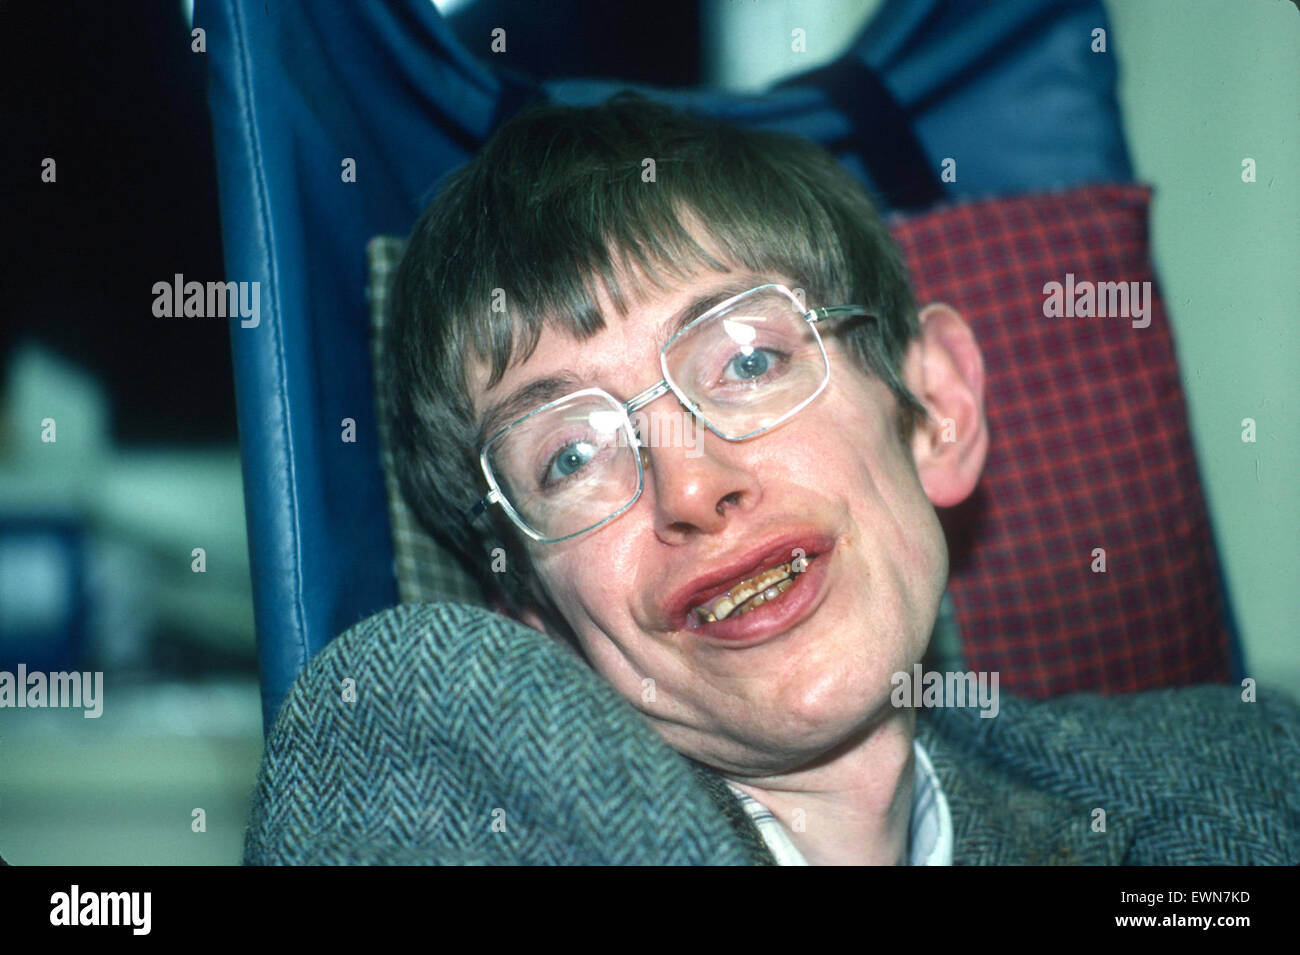 Stephen Hawking is the former Lucasian Professor of Mathematics at the University of Cambridge and author of A Brief History of Time which was an international bestseller. Stock Photo